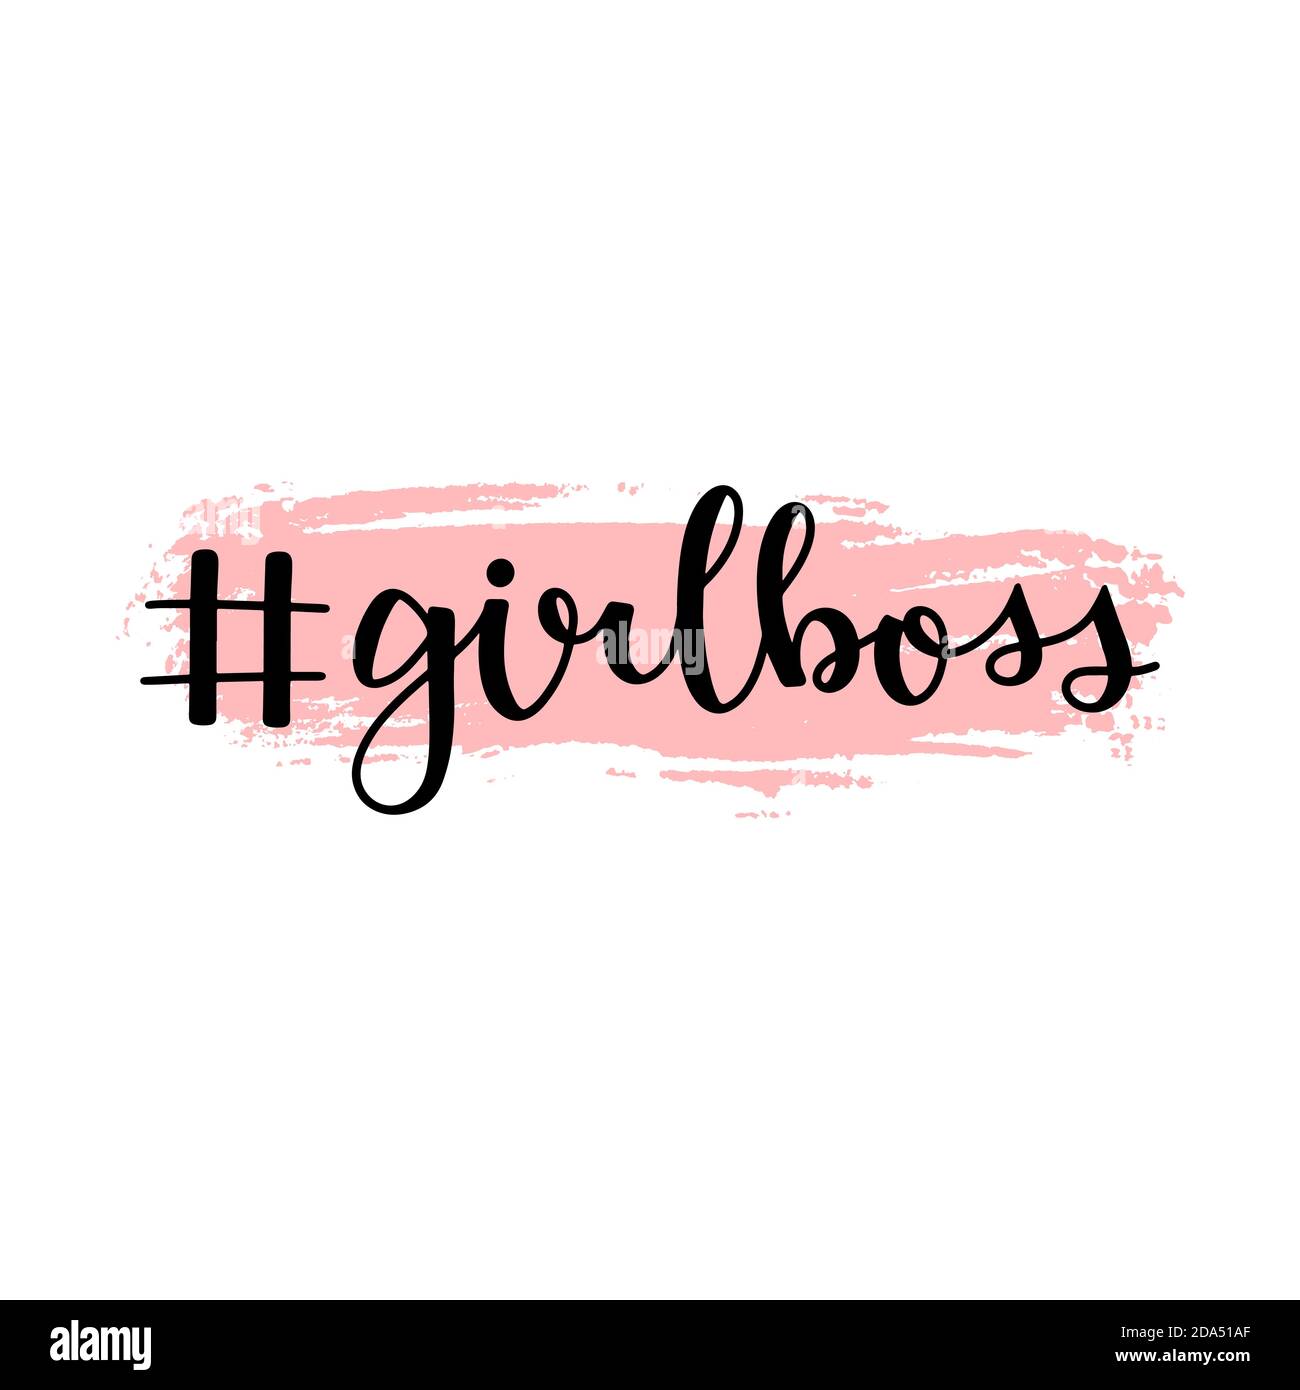 Hashtag girl boss trendy hand drawn lettering with pink brush